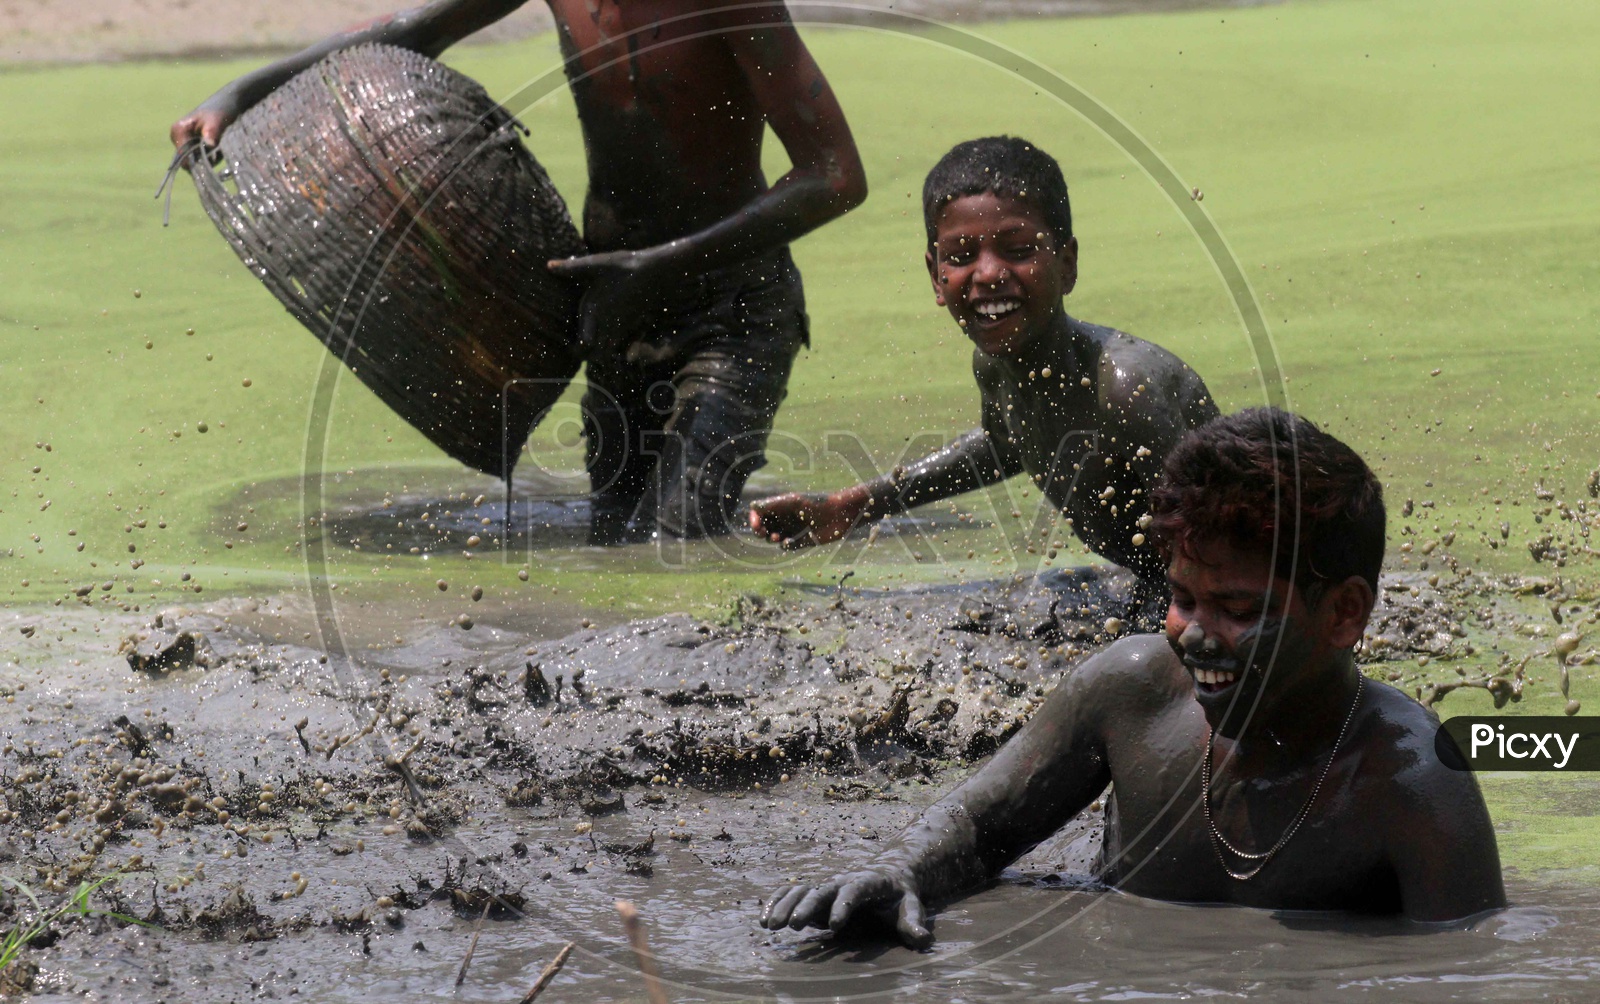 Kids in a dried pond